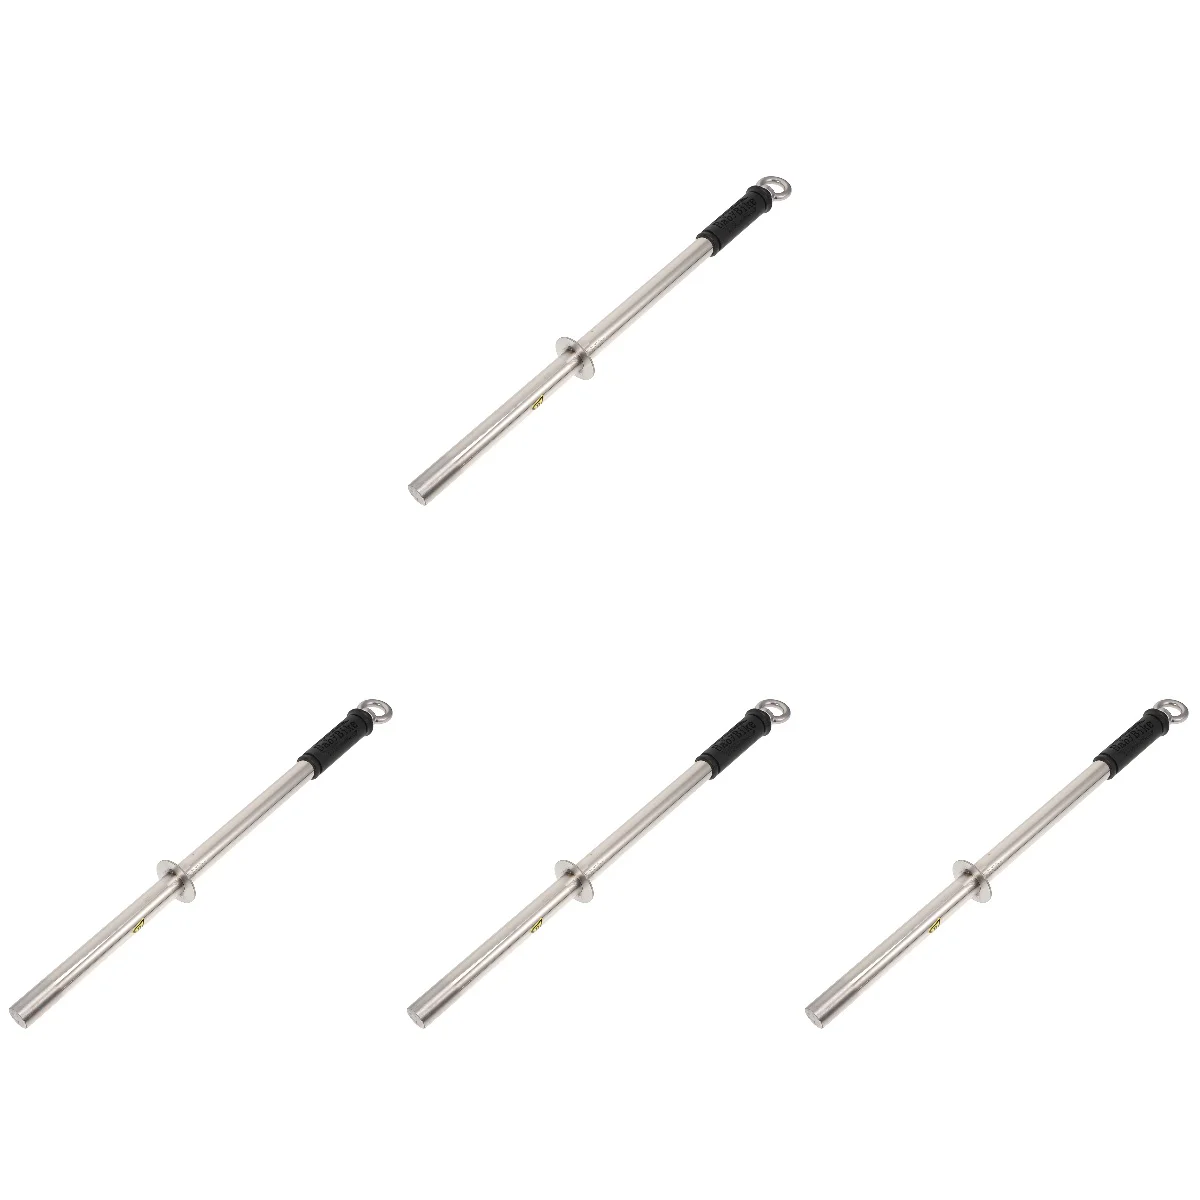 

4 PC Nail Magnet Iron Absorber Swarf Removal Magnetic Bar Pick Up Rod Handle Tool Stainless Steel Collect